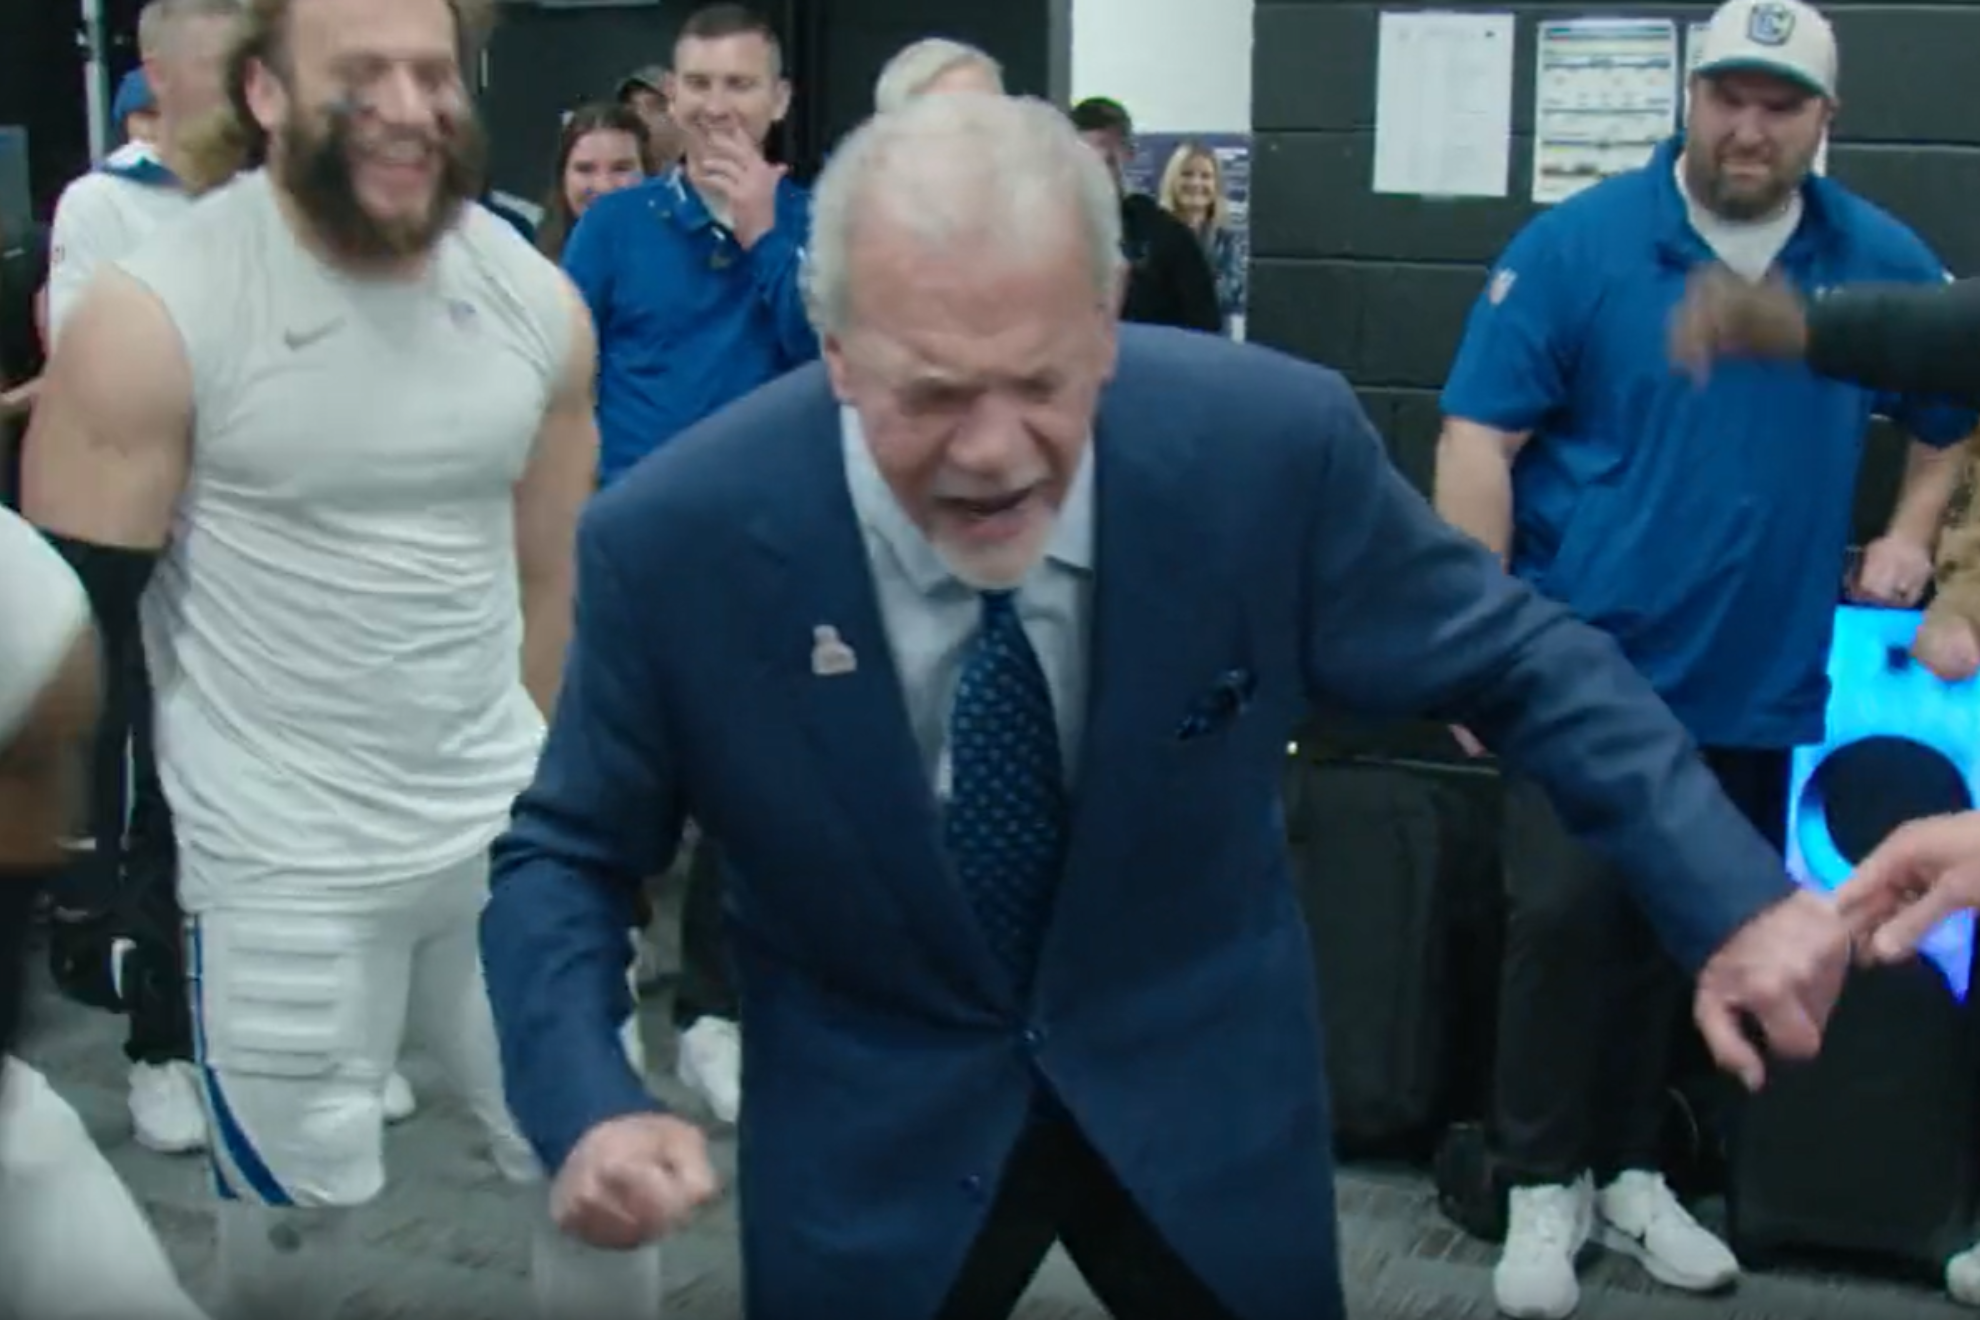 Jim Irsay sure knows how to have a fun time.